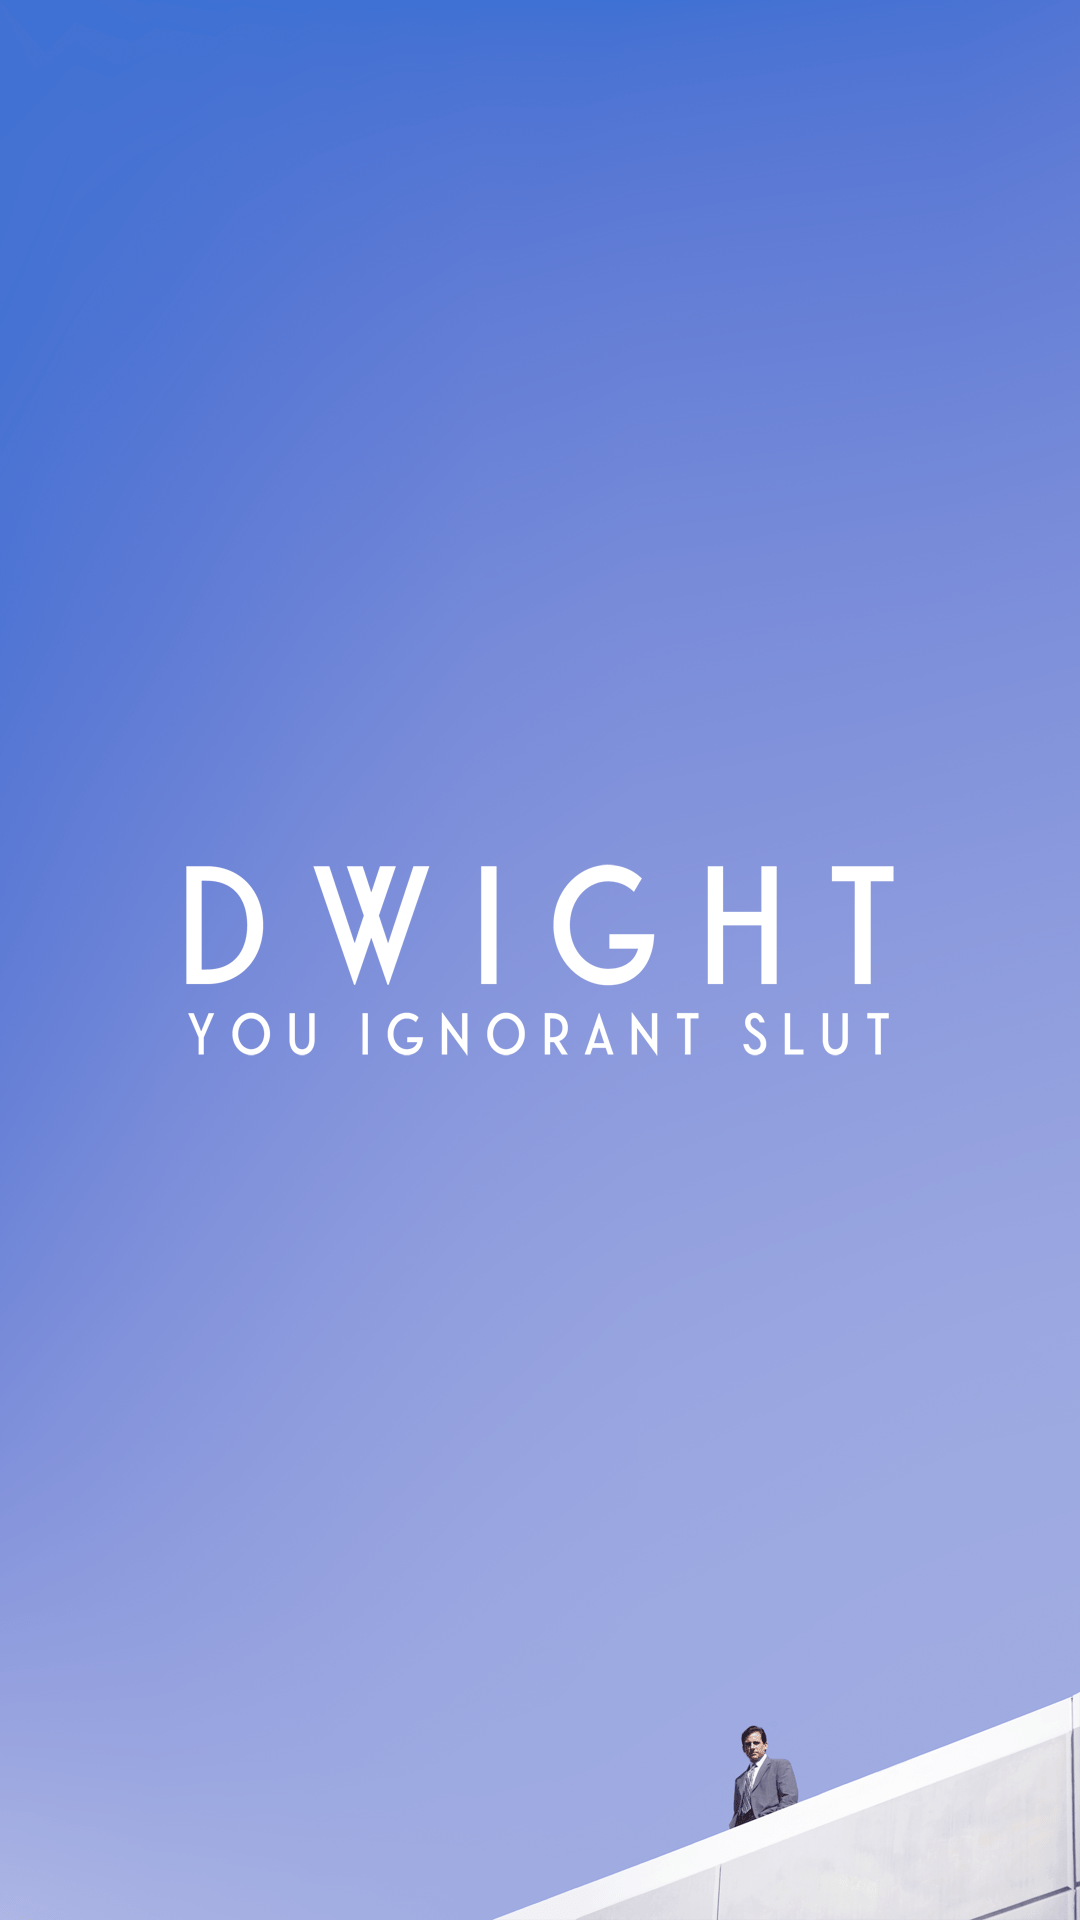 Dwight Schrute wallpaper for iPhone 6 plus and other iPhone sizes. The Office wallpaper. - The Office